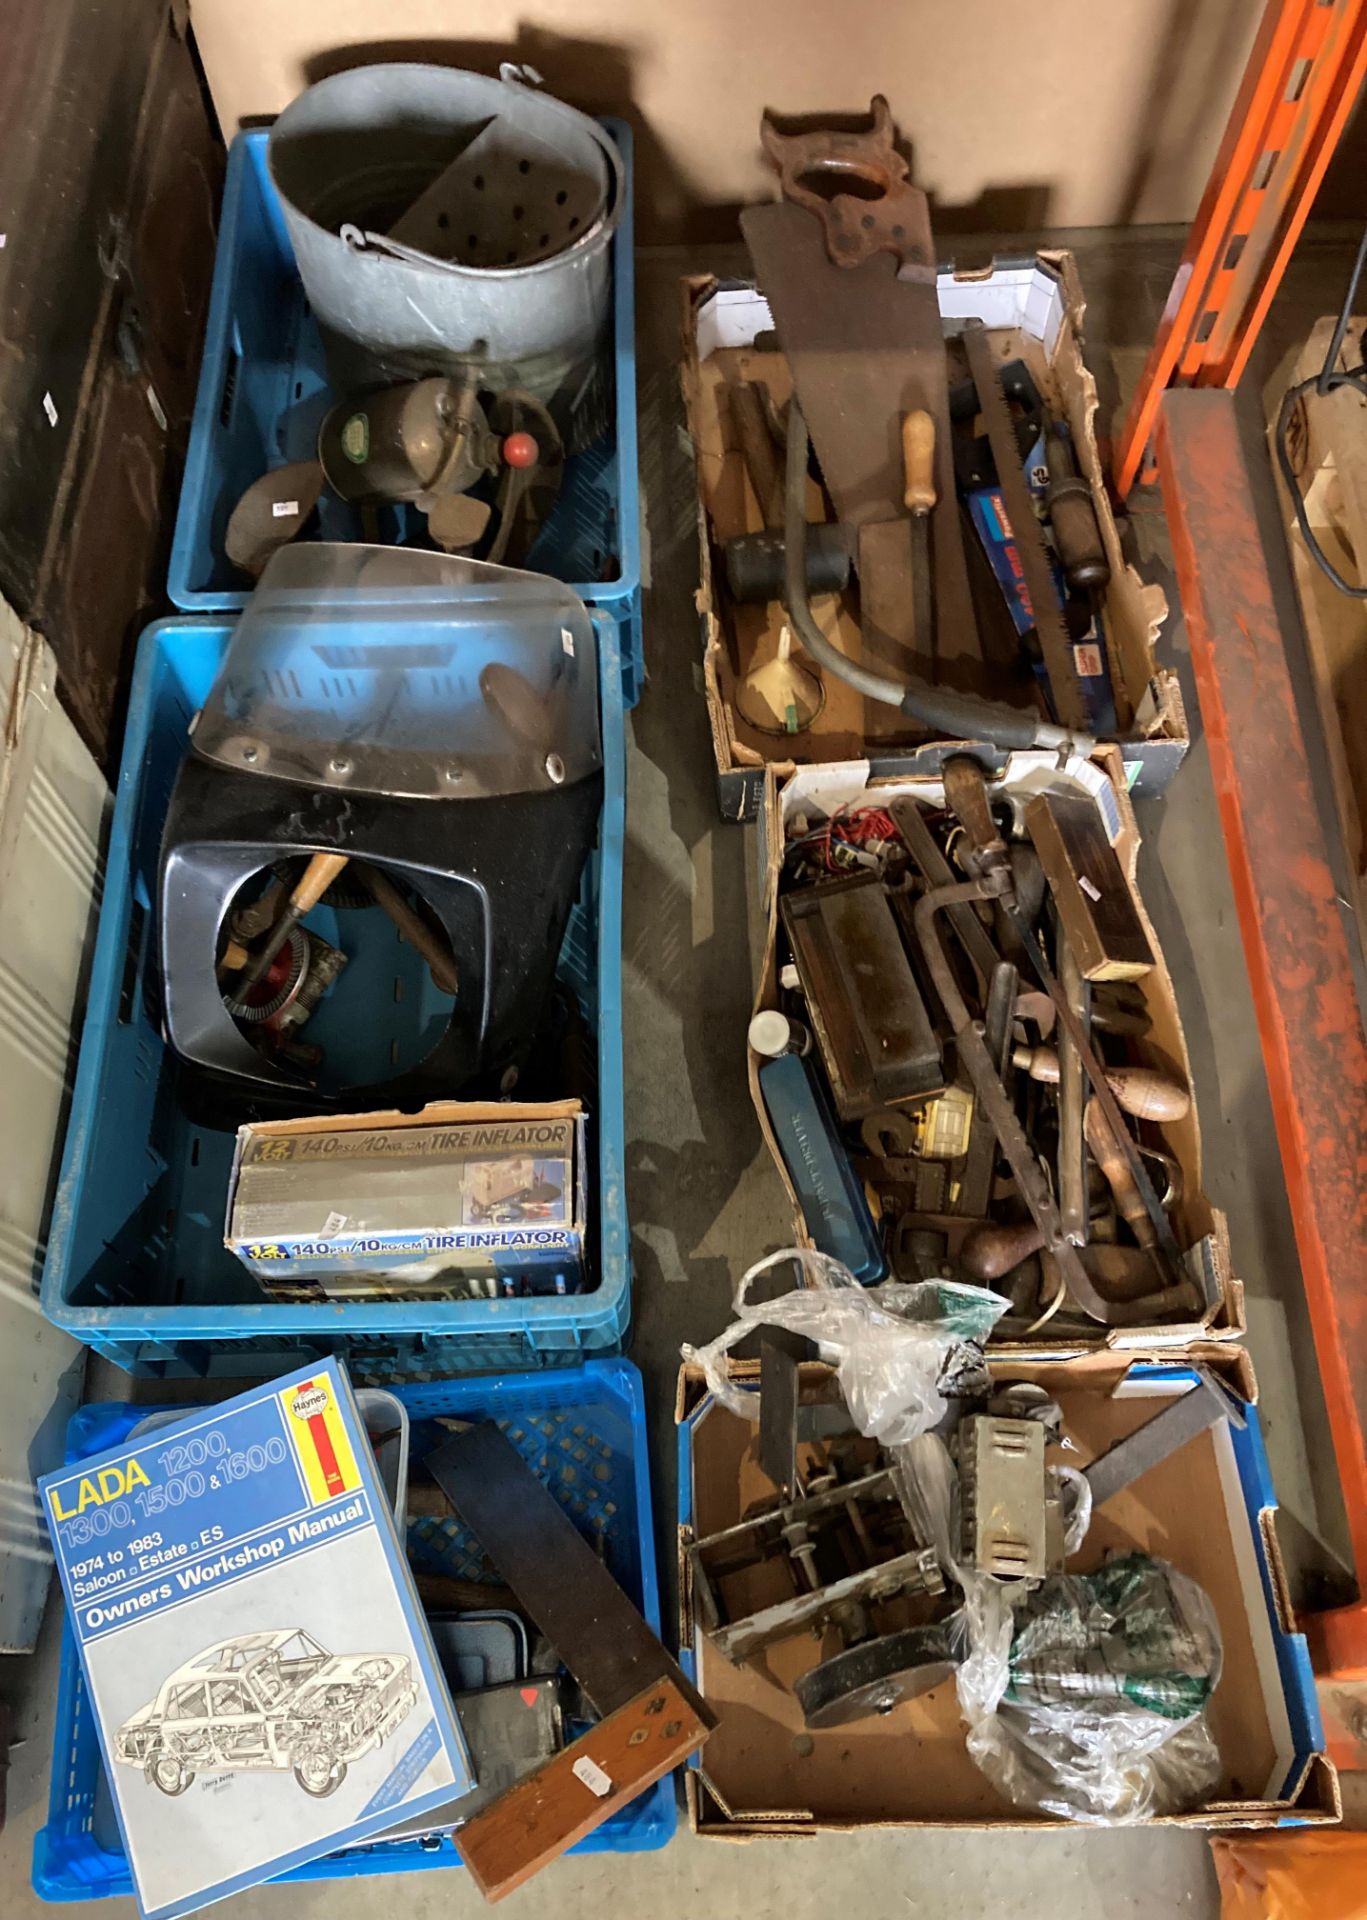 Contents to six boxes and crate - assorted hand tools, bit and brace, shoe last, saws, spanners etc.